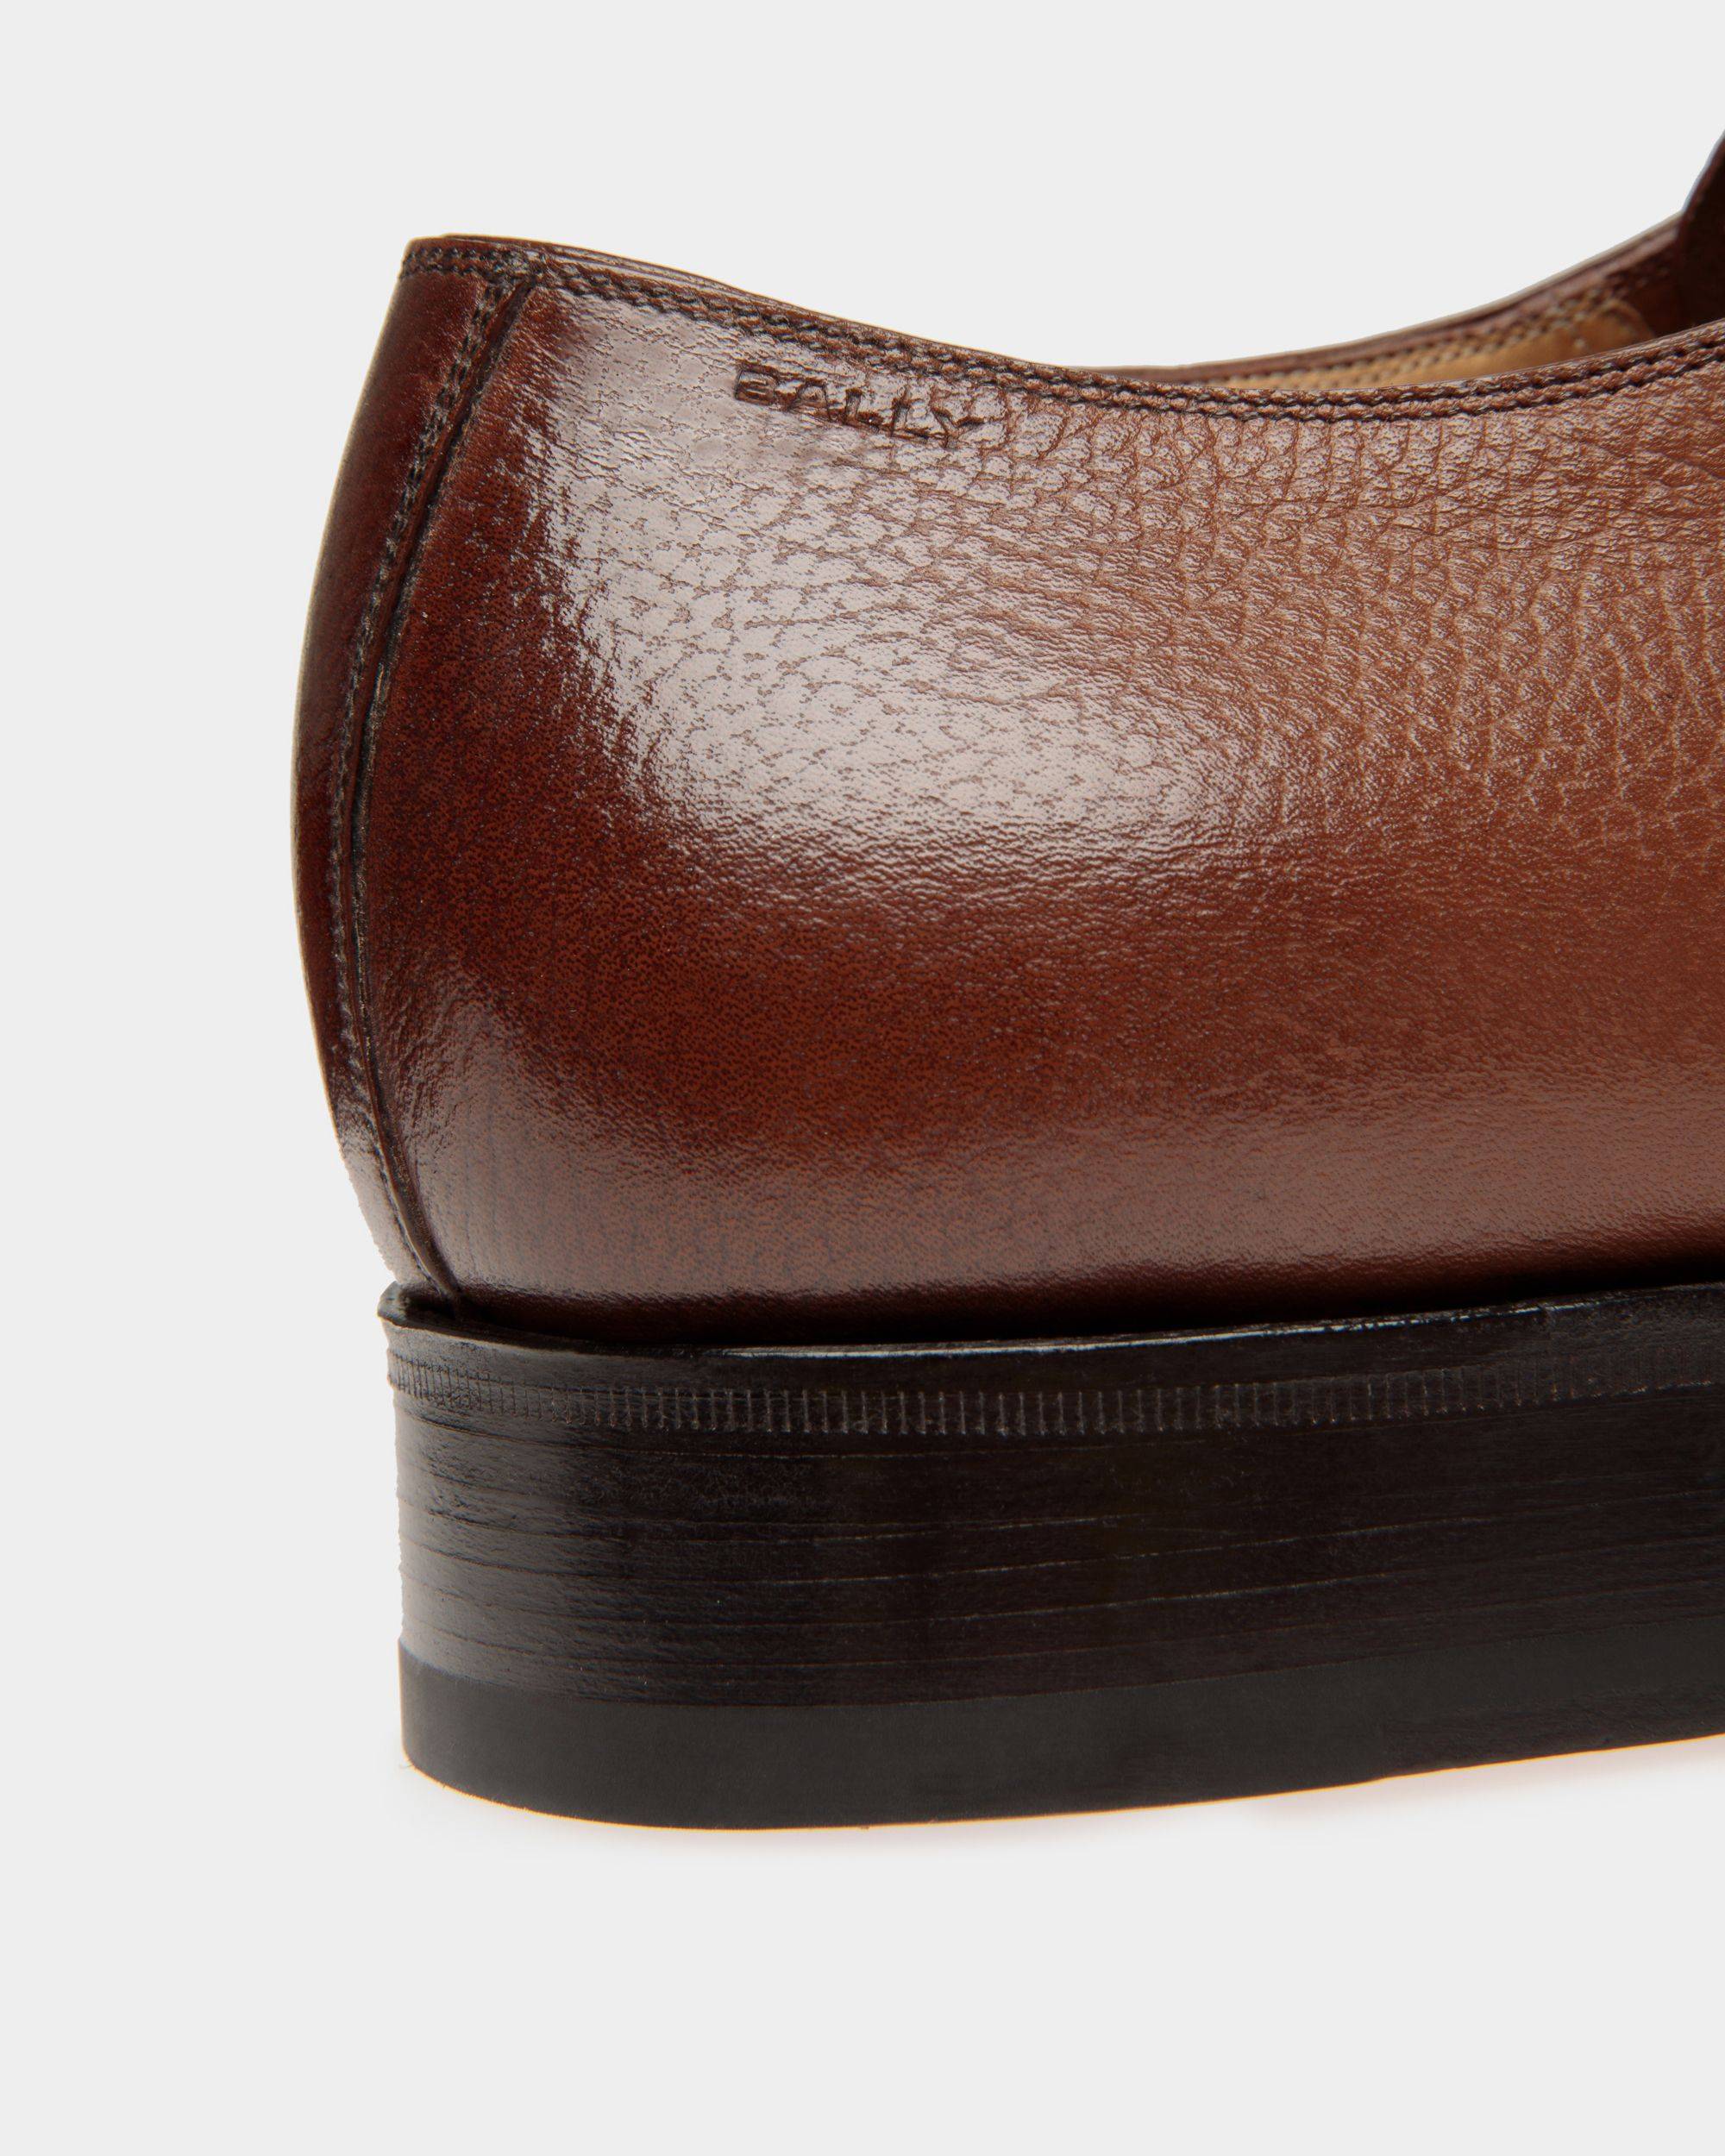 Schoenen | Men's Loafer in Brown Embossed Leather | Bally | Still Life Detail